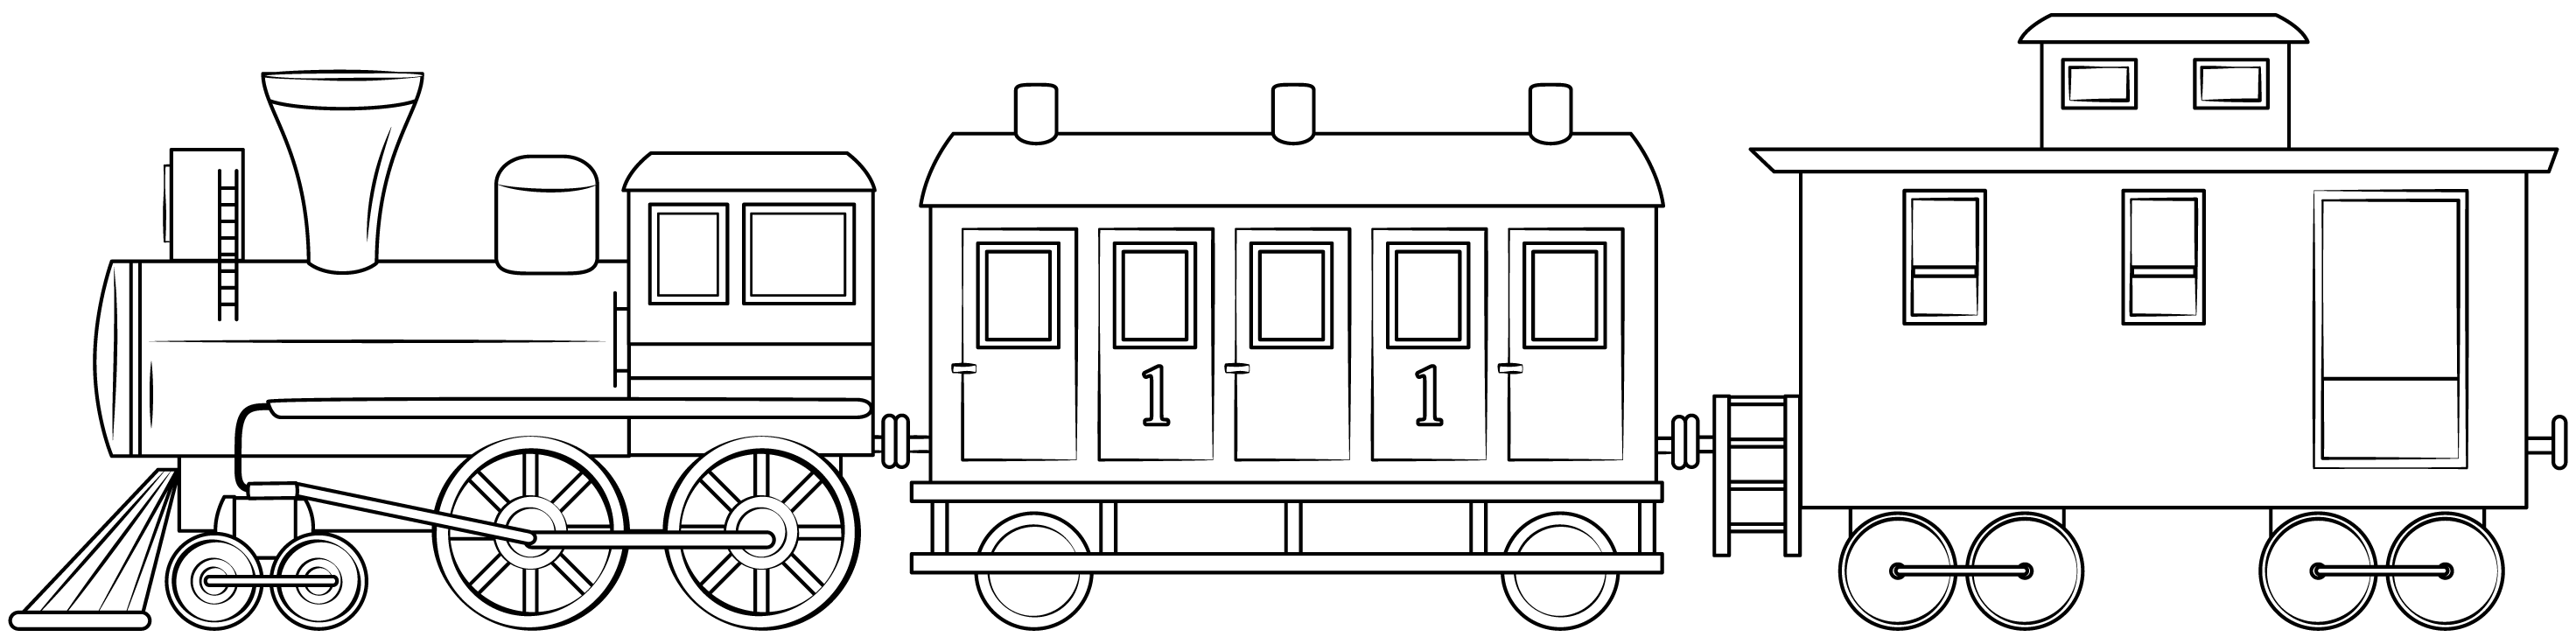 Printable Train Cut Out Template